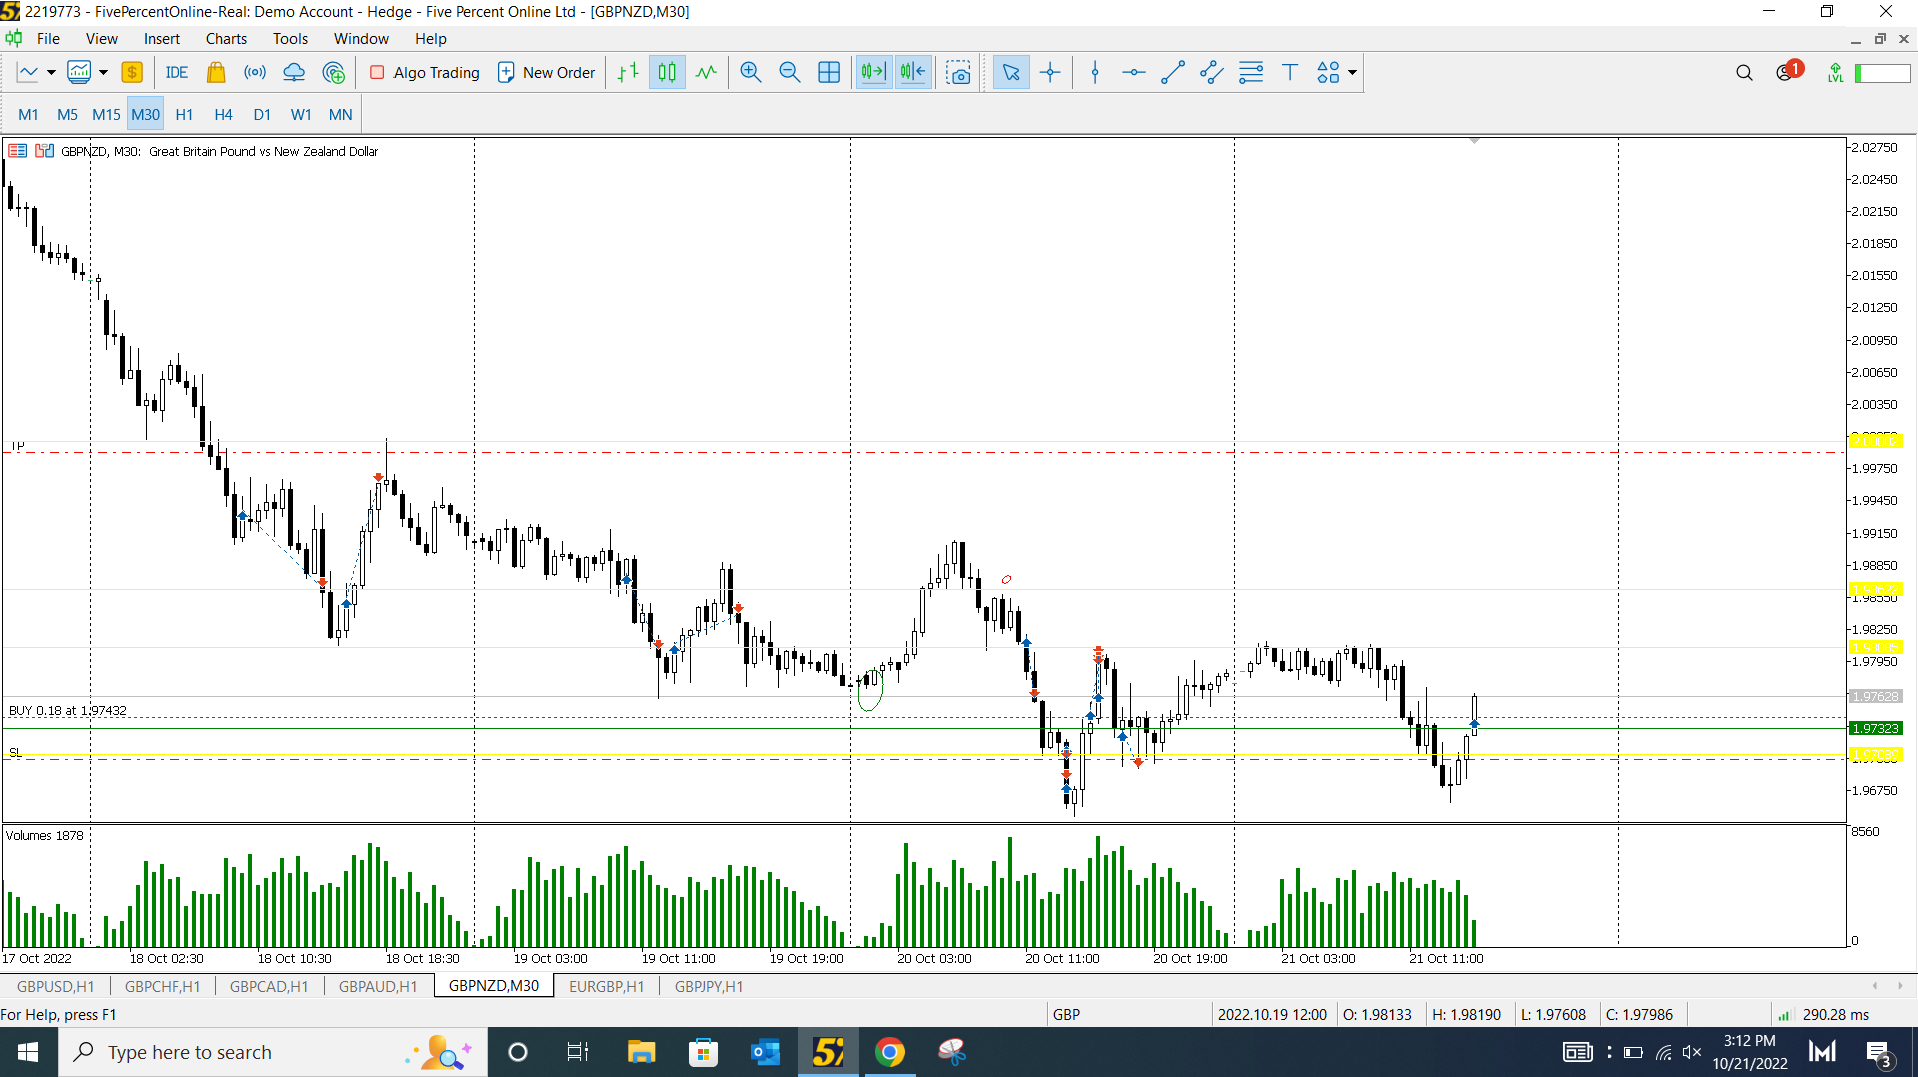 GBP/NZD H1 Continuation